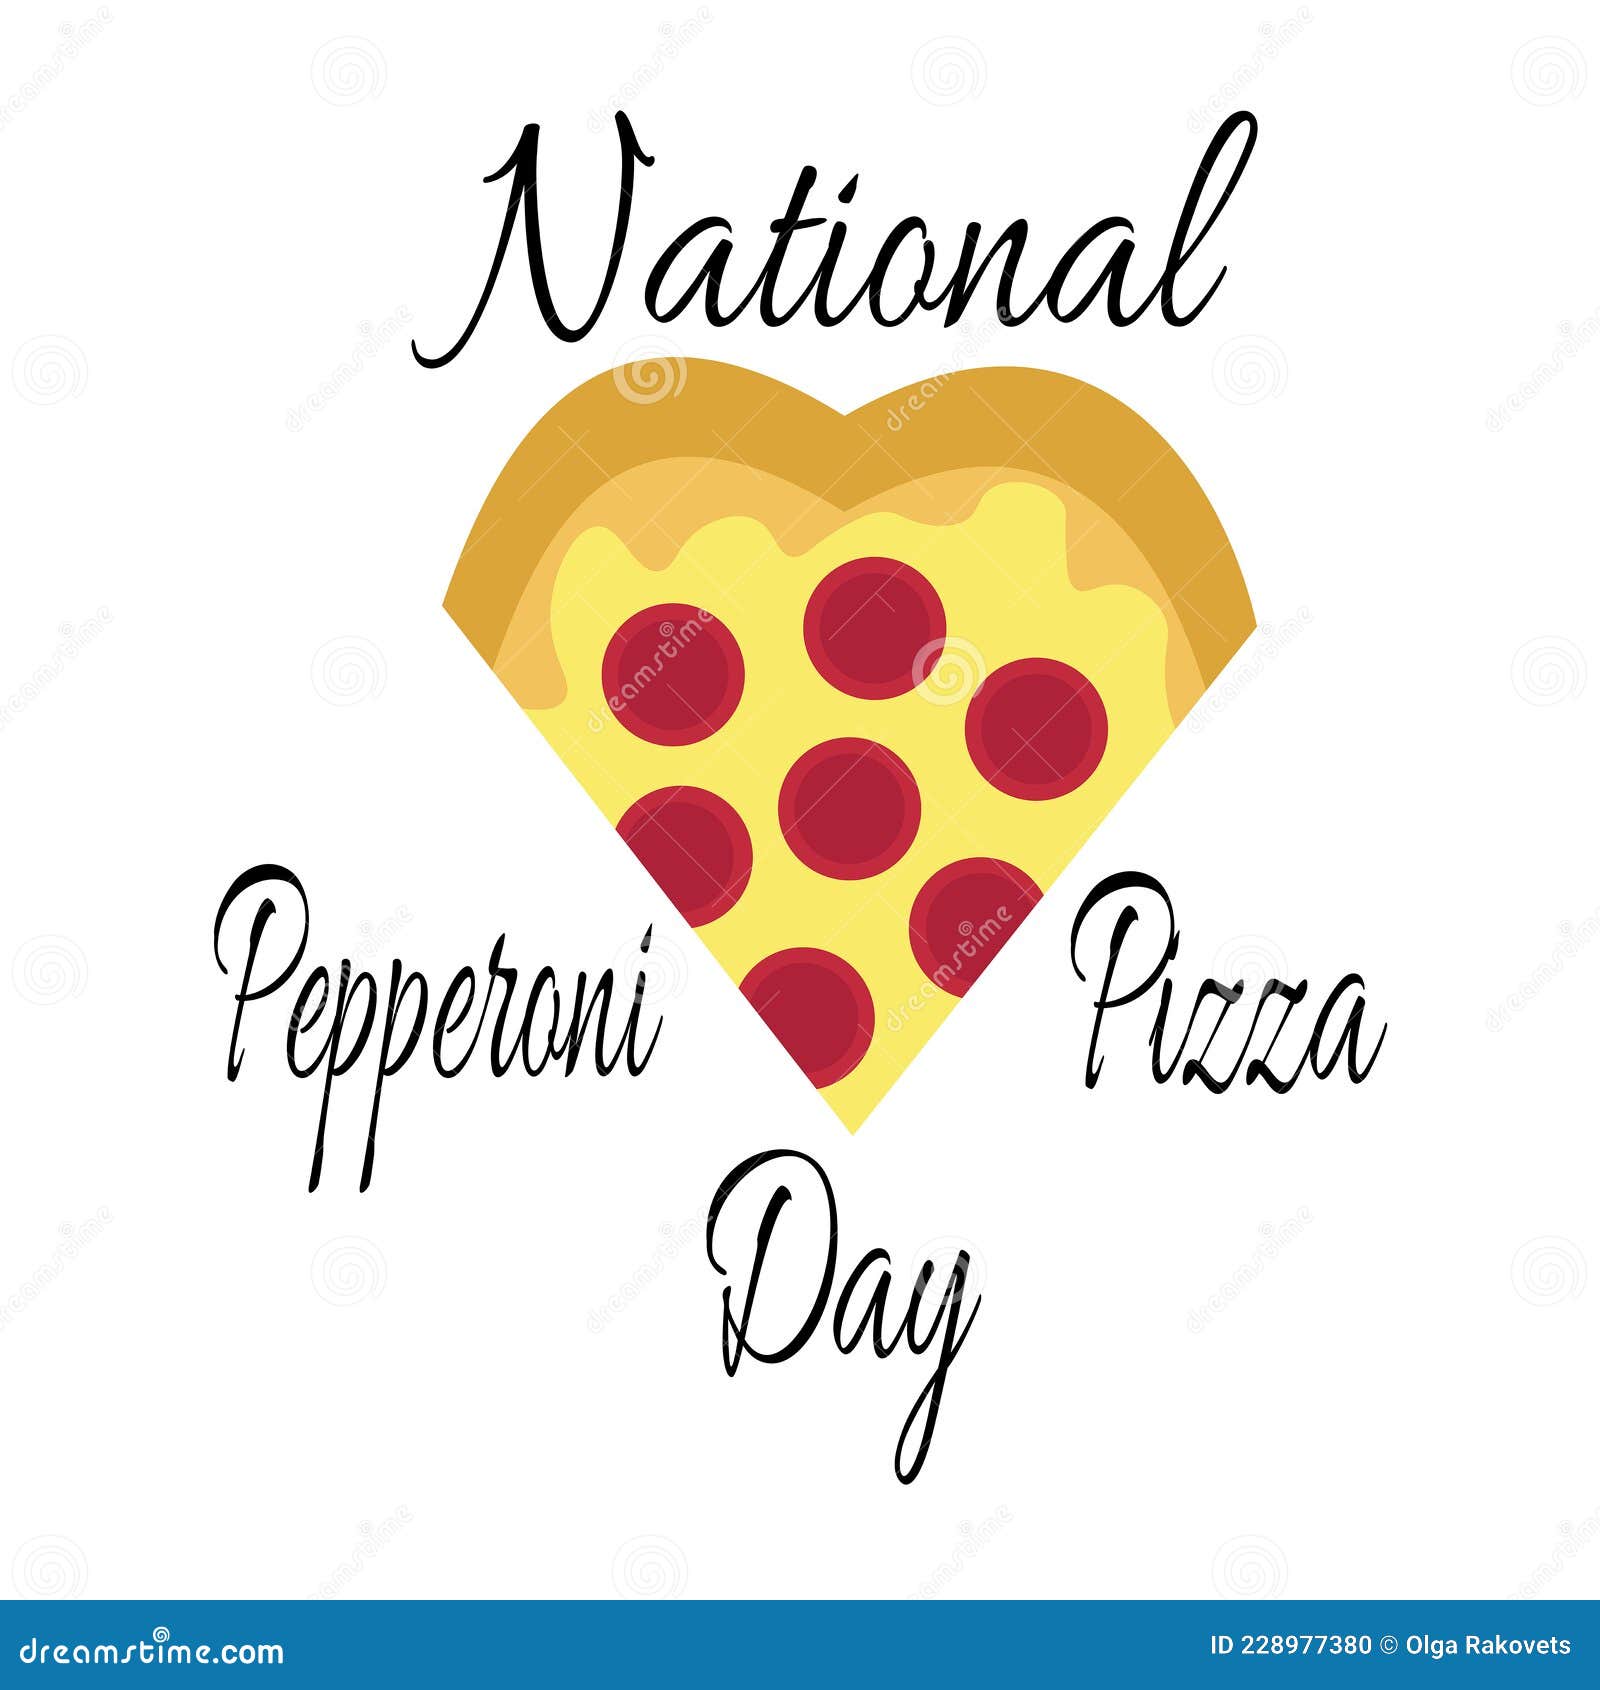 National Pepperoni Pizza Day, Idea for a Poster or Menu Design Stock